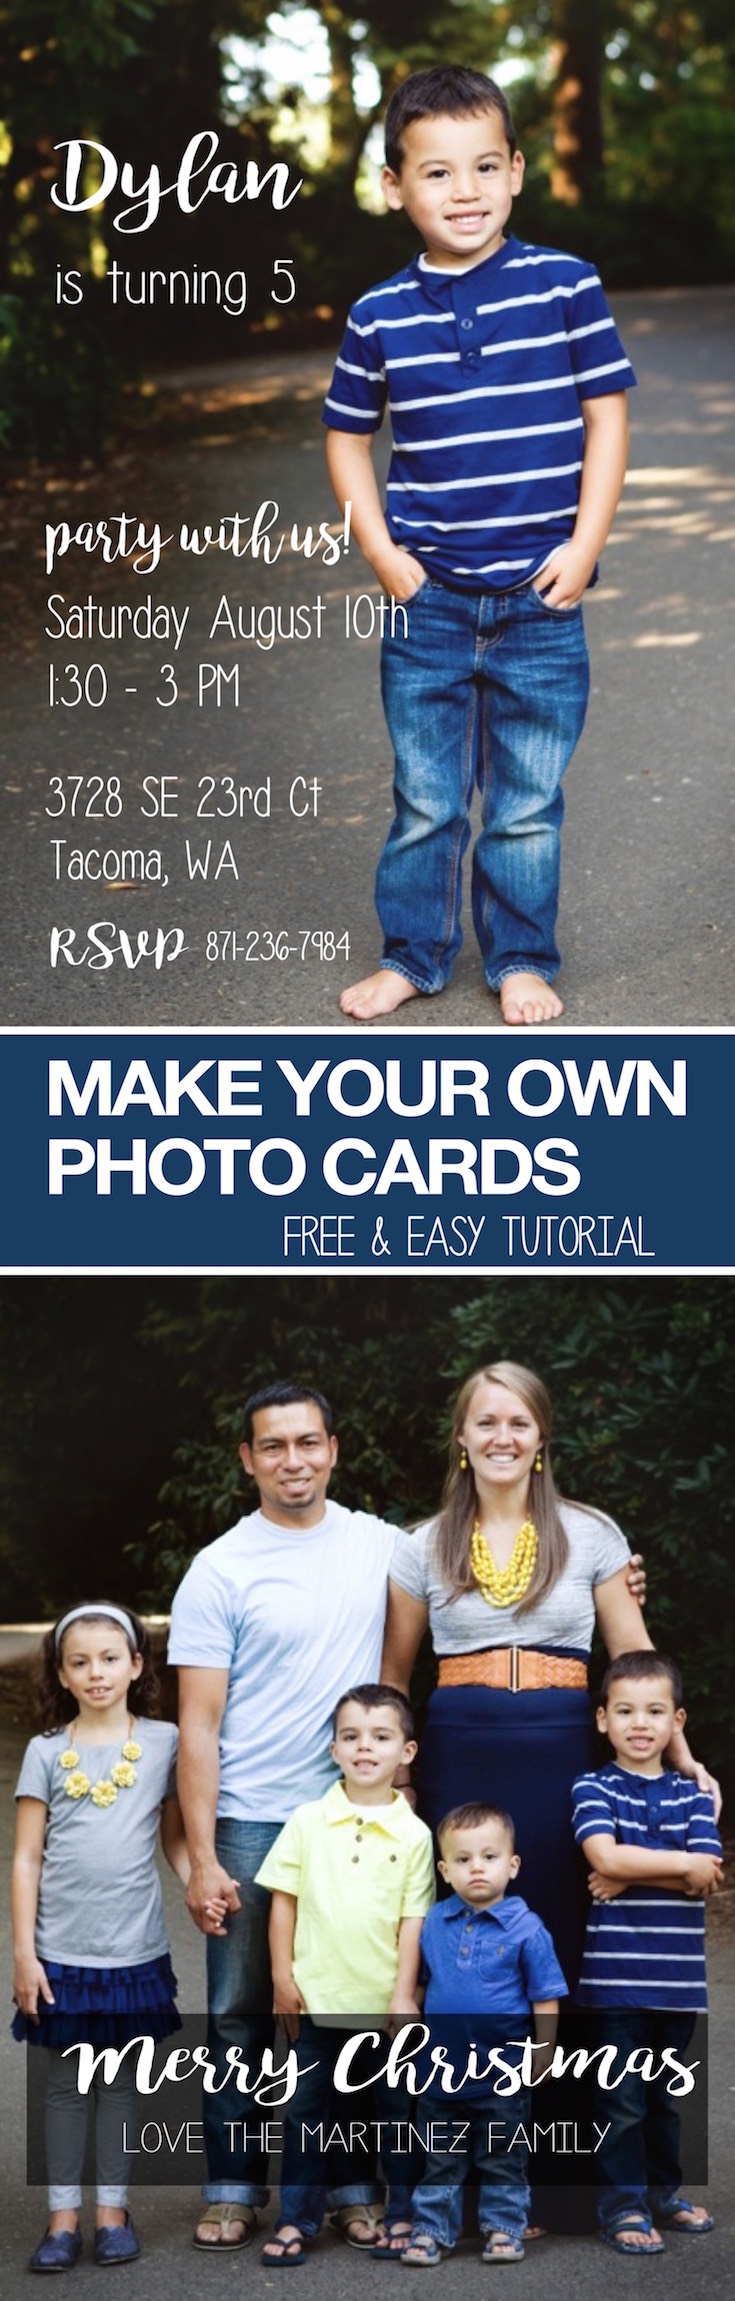 How to make photo cards or invitations DIY. Tutorial on how to use a free website to design your own personalized custom Christmas cards, birthday invitations, wedding announcements, save the date, baby announcements, and more!